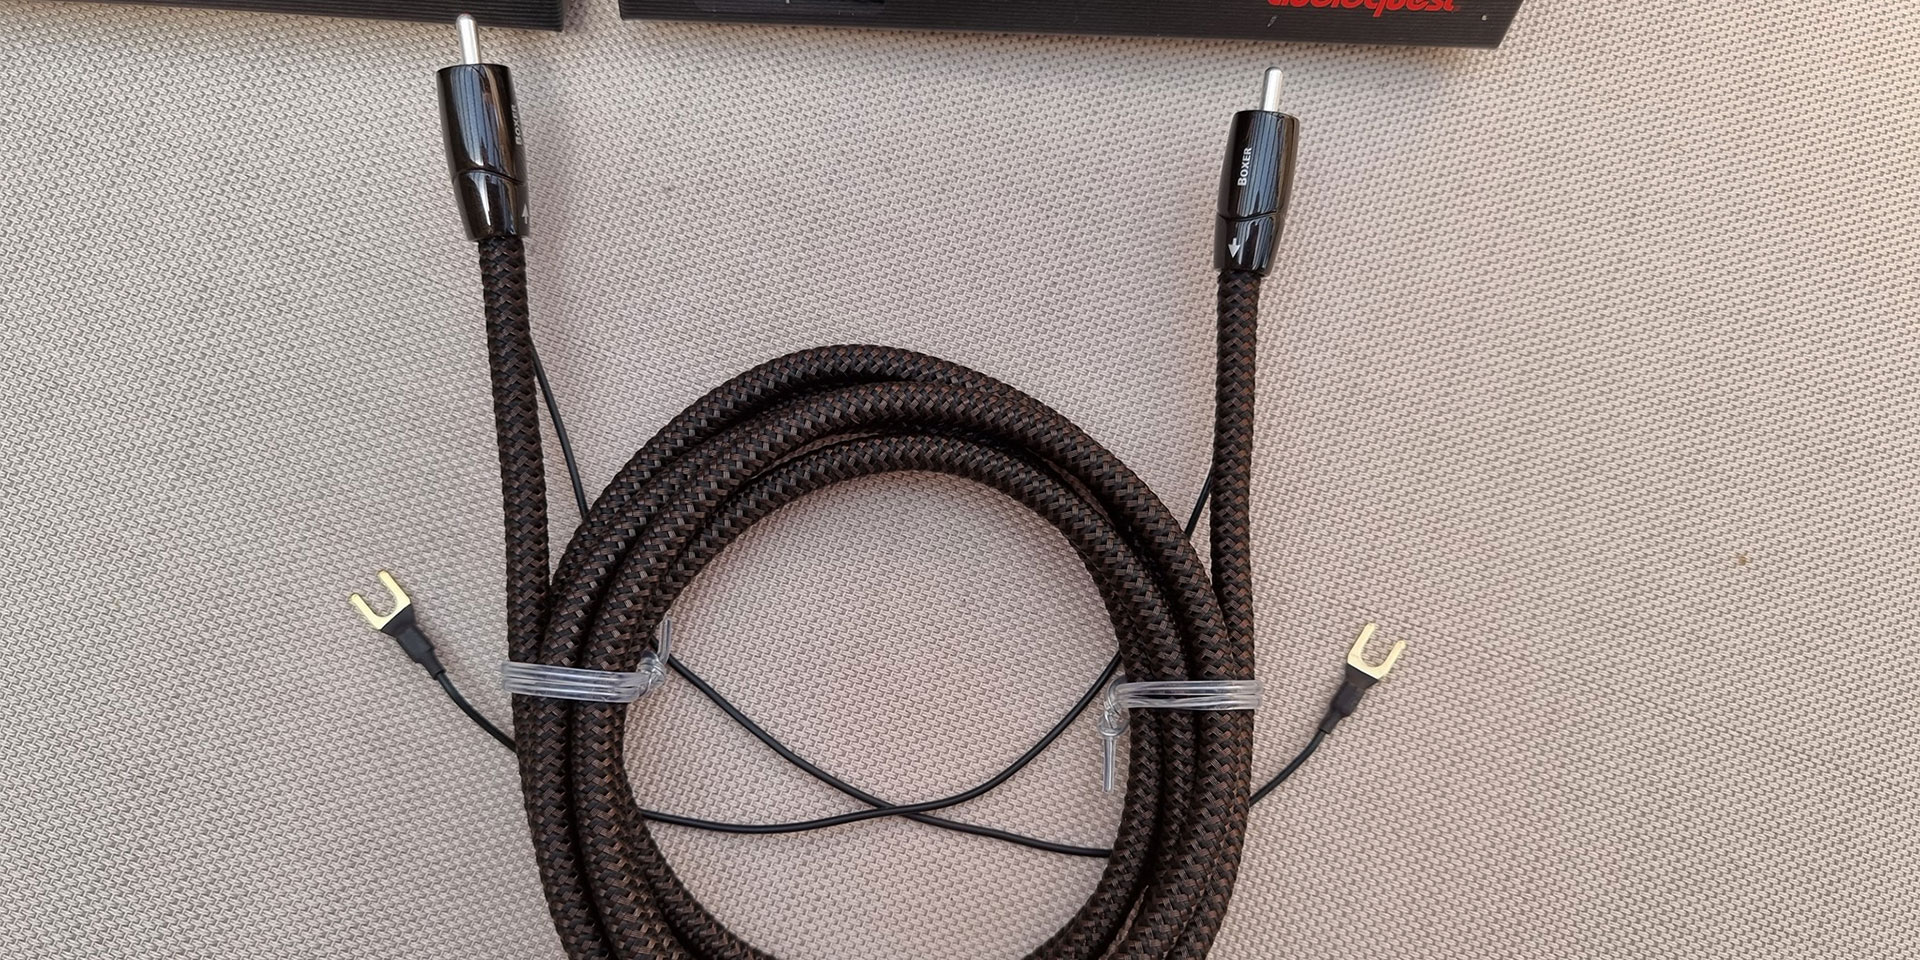 Best subwoofer cable